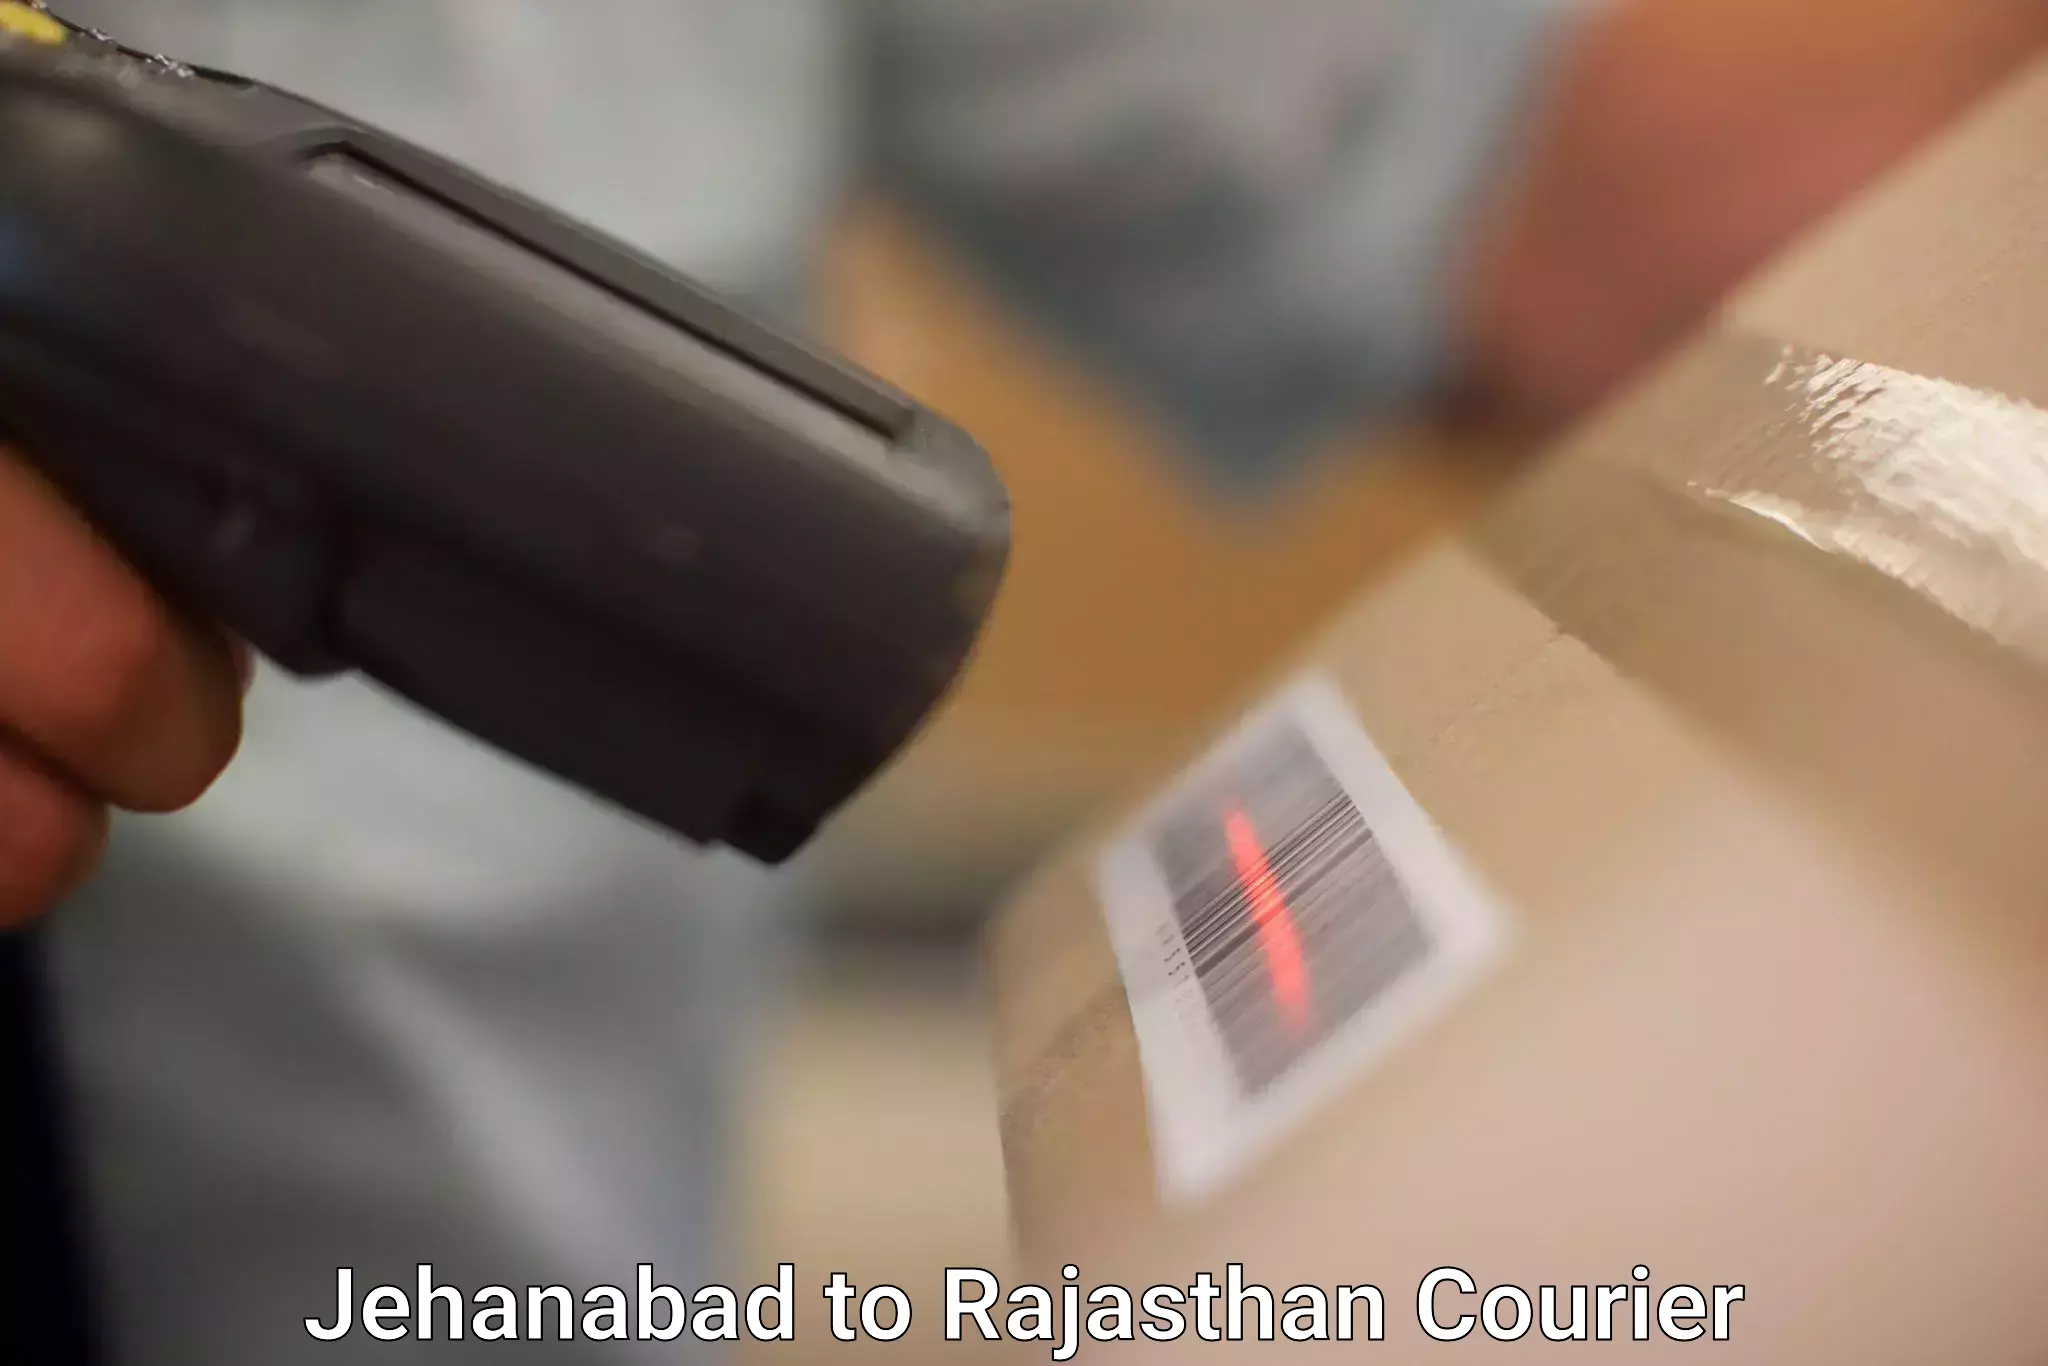 High-priority parcel service Jehanabad to Rajasthan